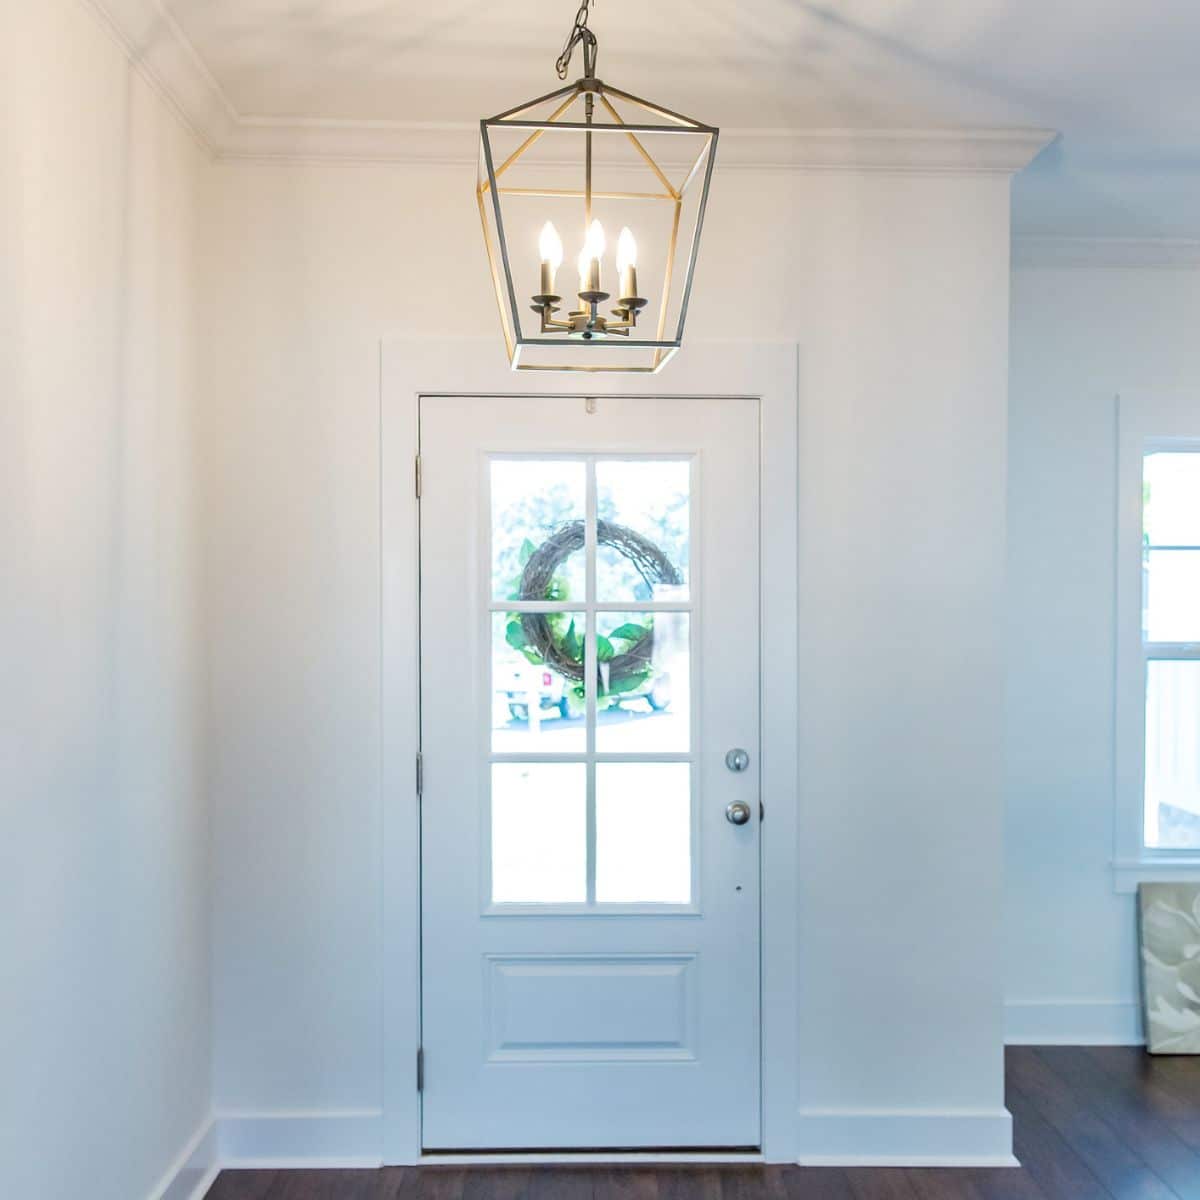 a simple chandelier in a hallway